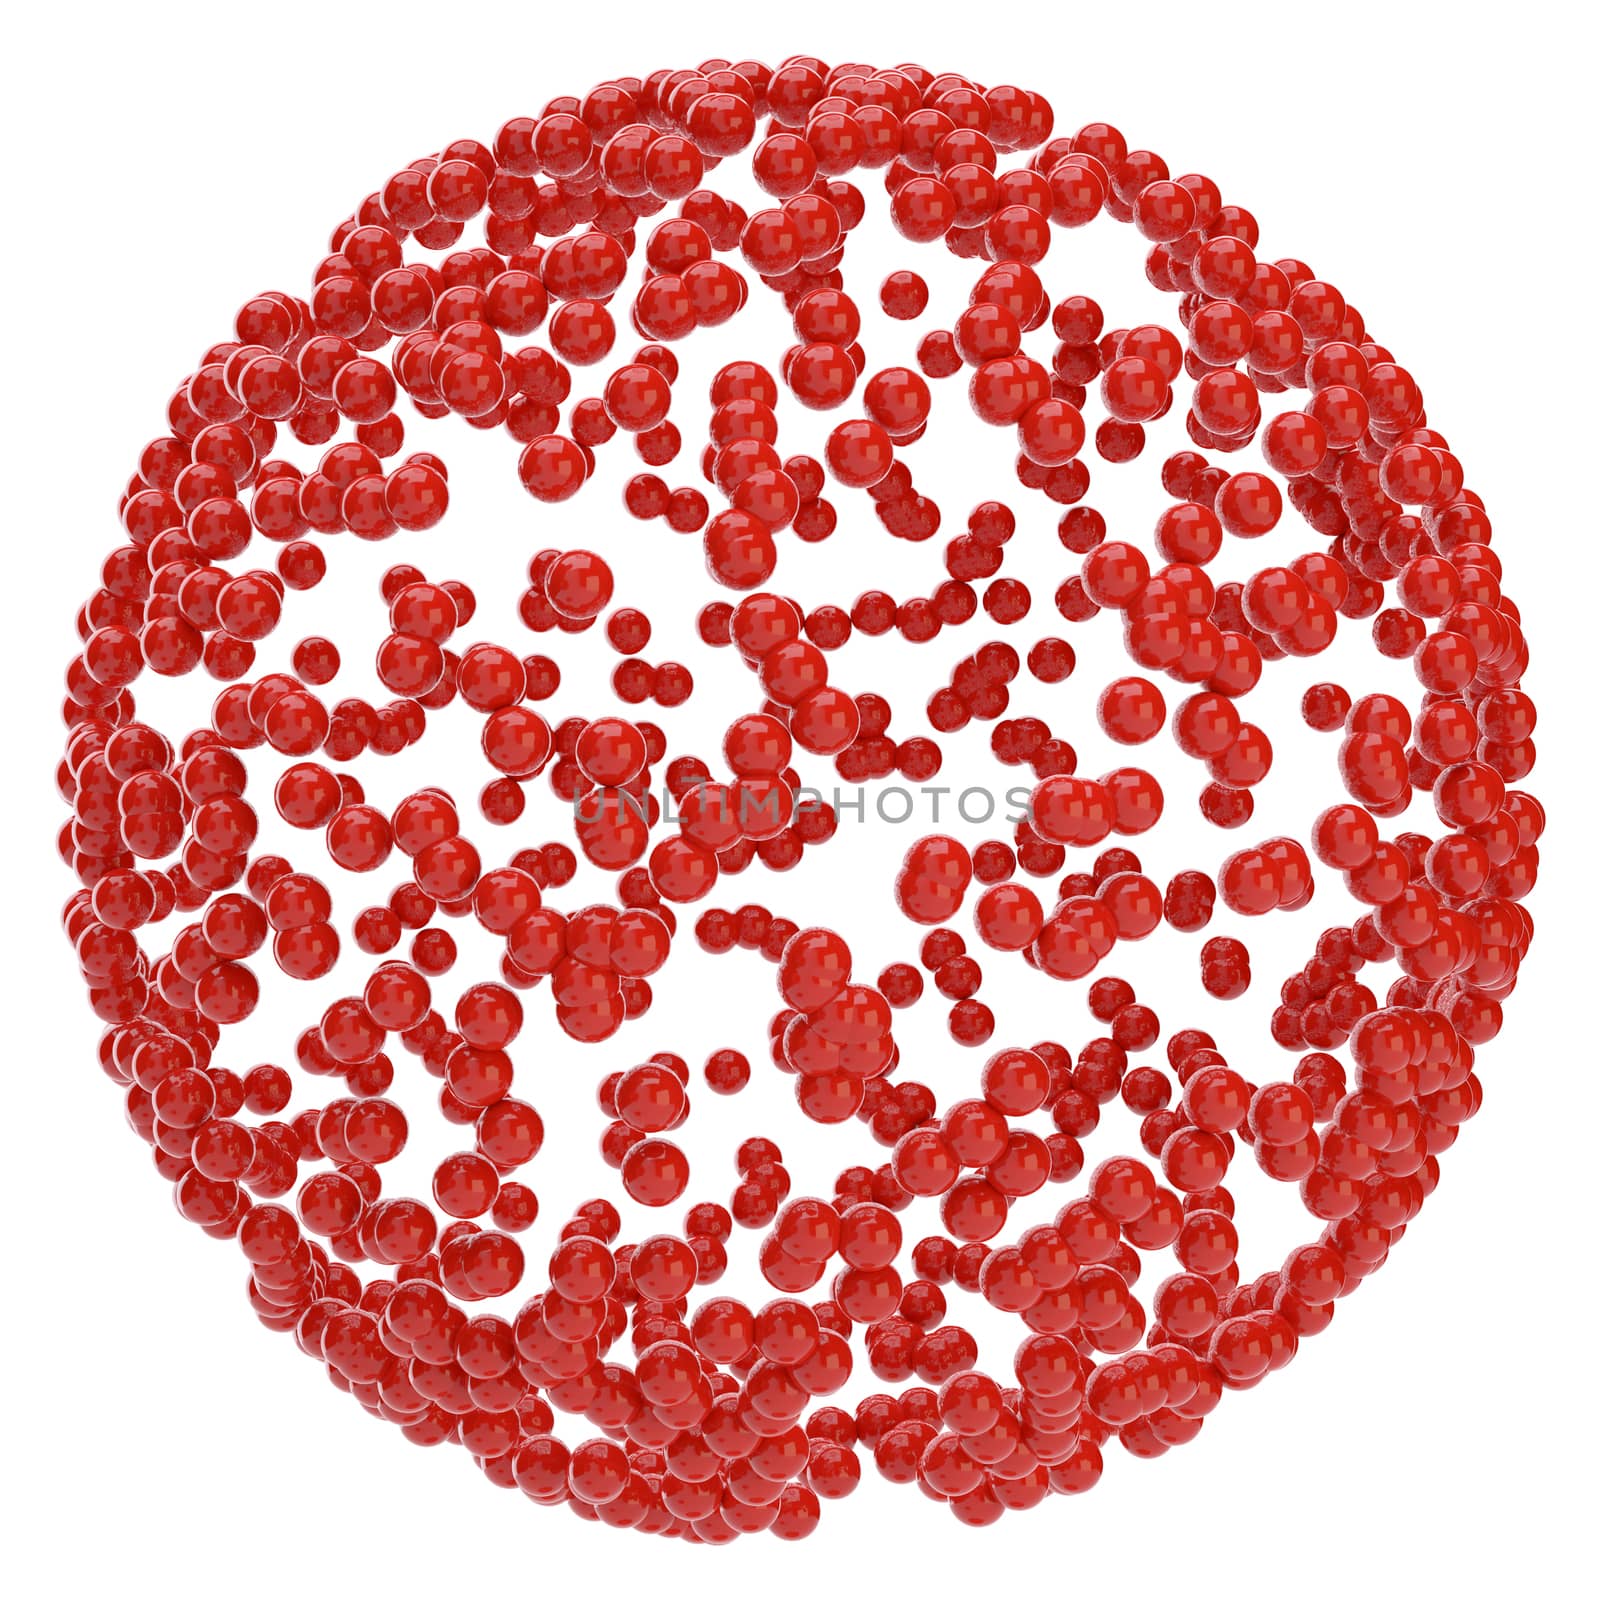 Red abstract sphere consisting of small particles by cherezoff